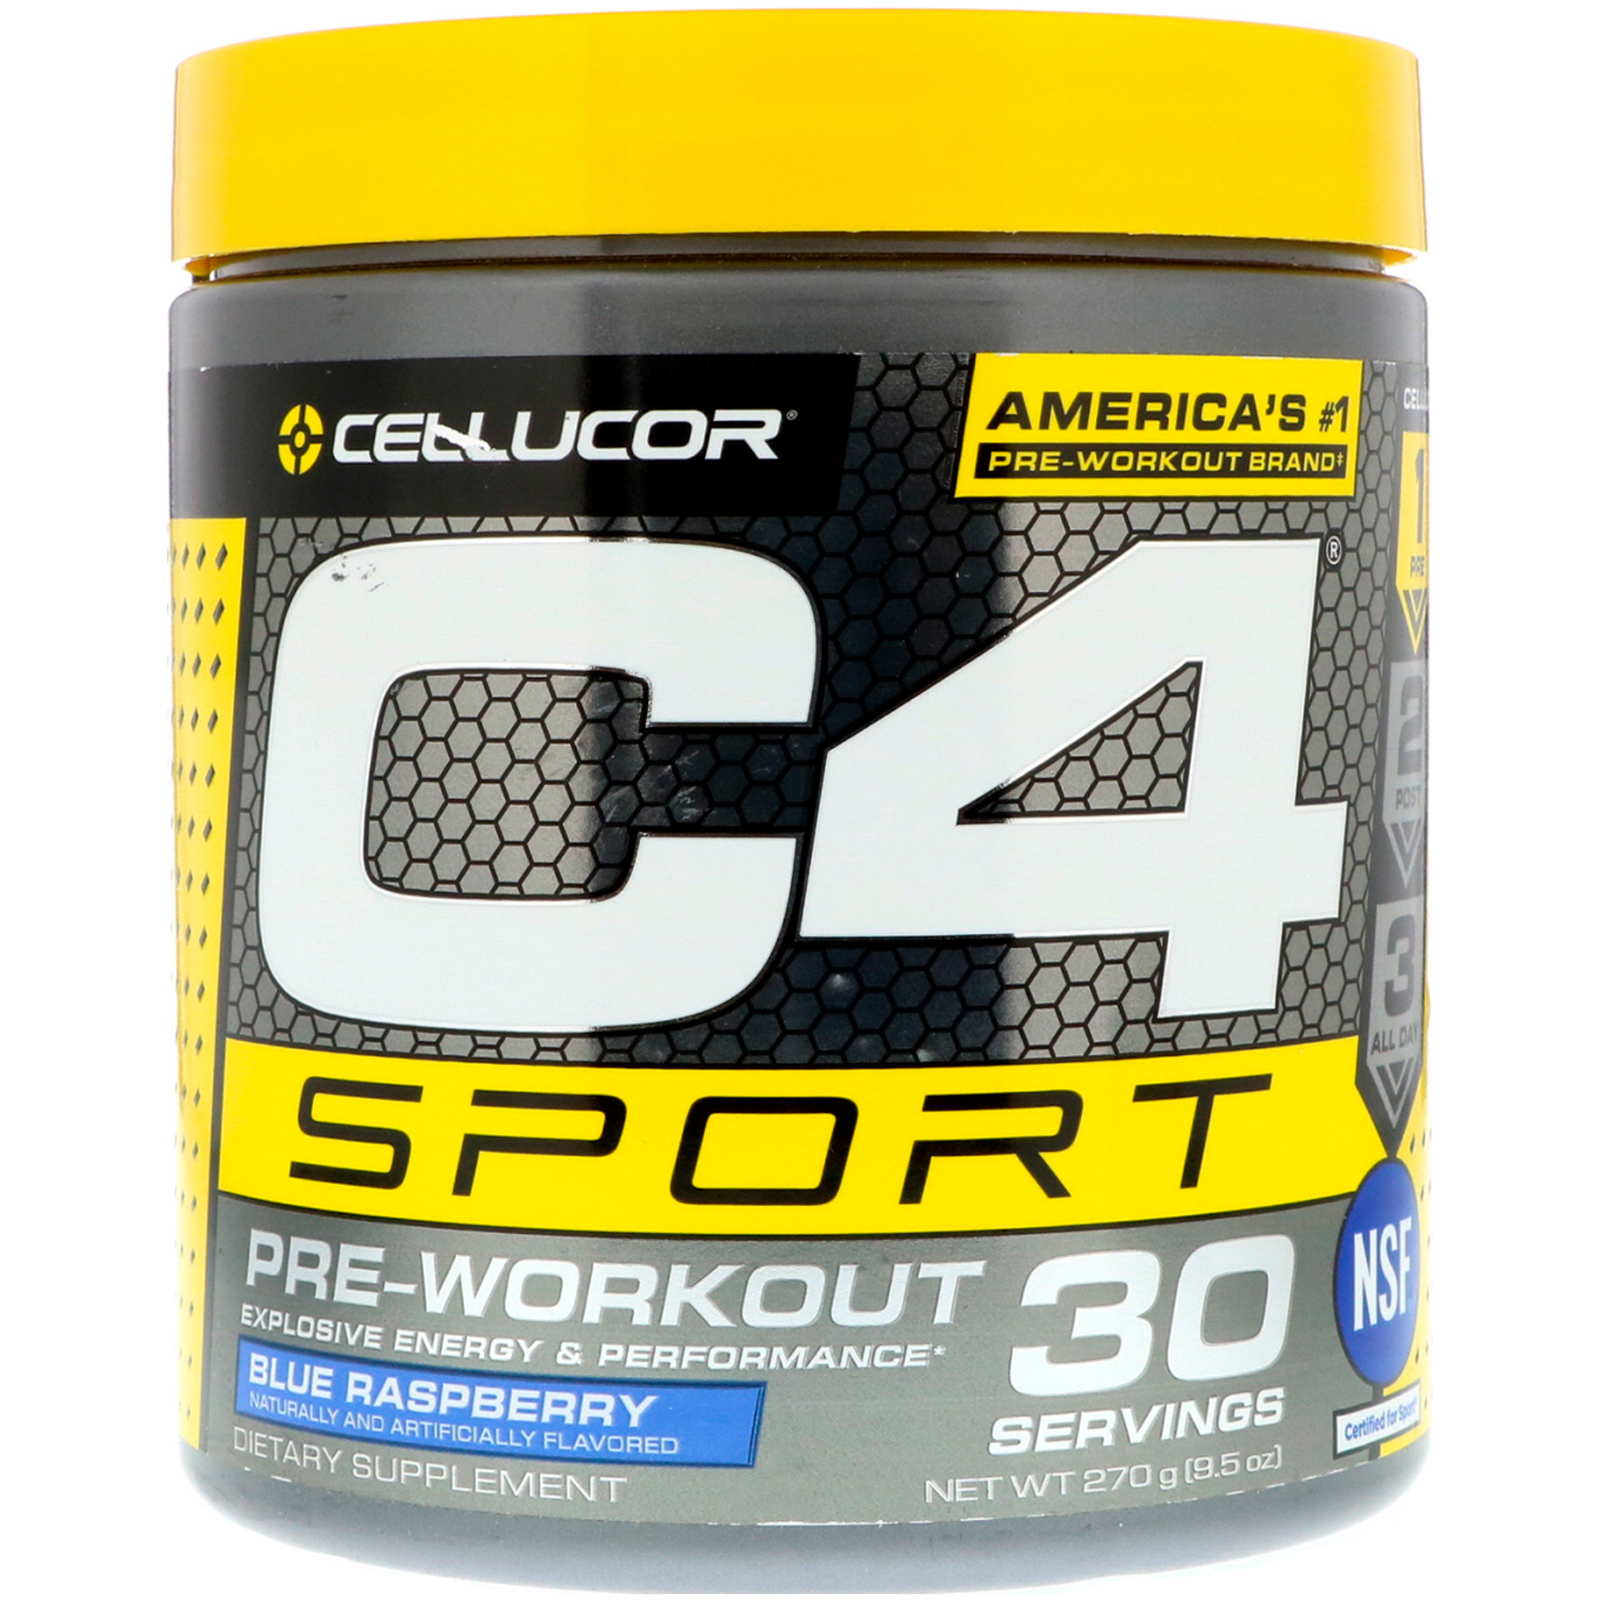 Simple What is the best c4 pre workout for Burn Fat fast